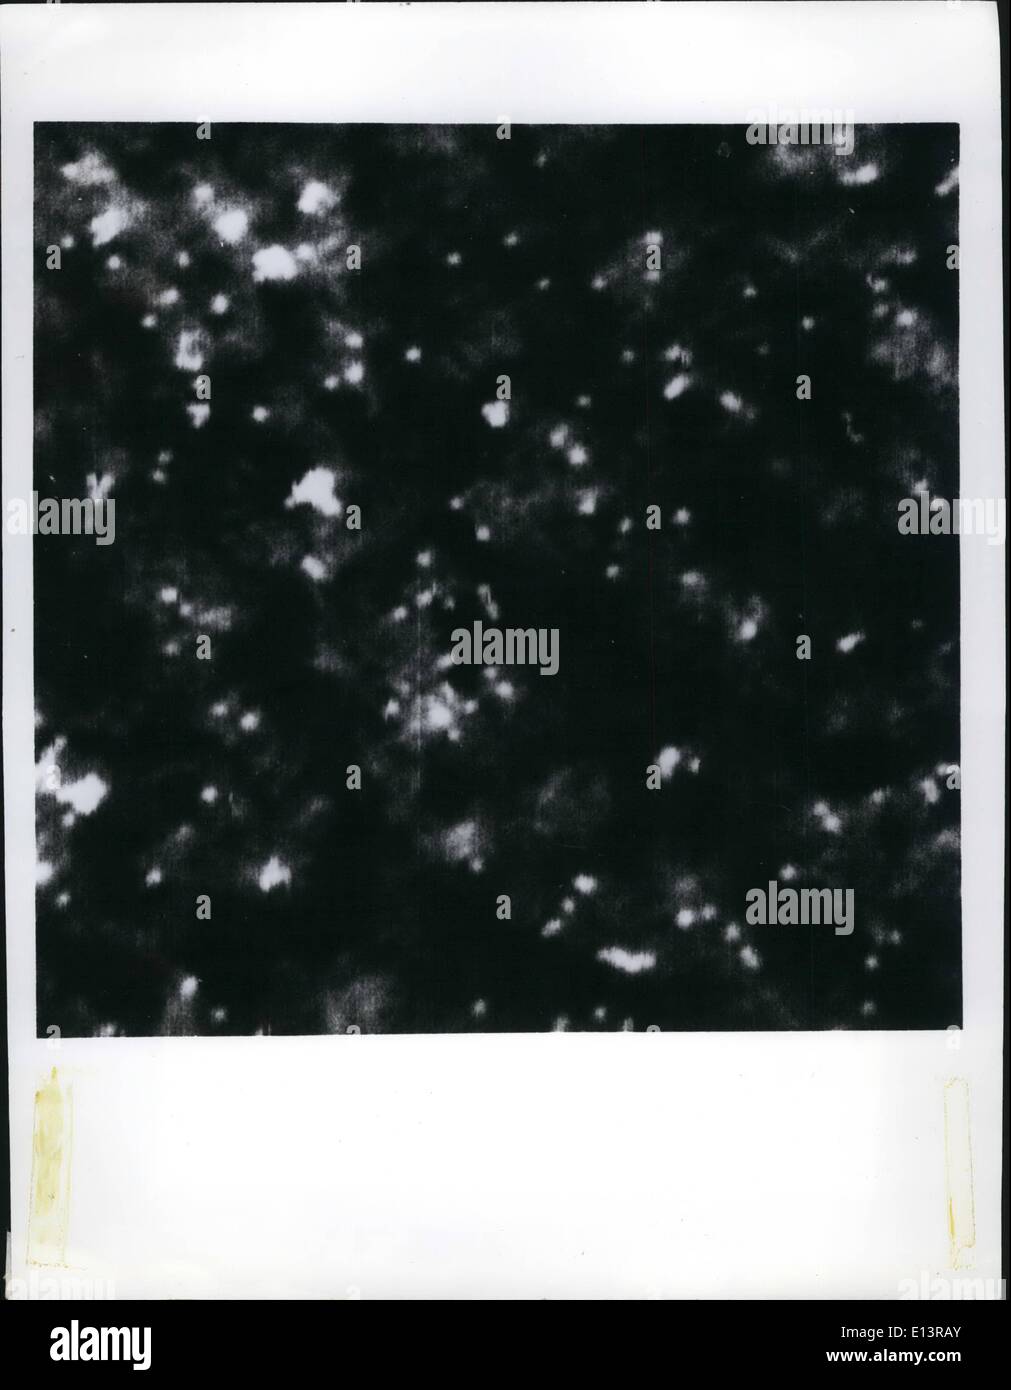 Mar. 22, 2012 - Images of uranium atoms (bright spots) on a thin carbon film one tenth of a millionth of an inch thick. Magnification is 7.5 million times. Obtained using one of the atomic-resolution scanning transmission electron microscopes developed at the University of Chicago. Stock Photo